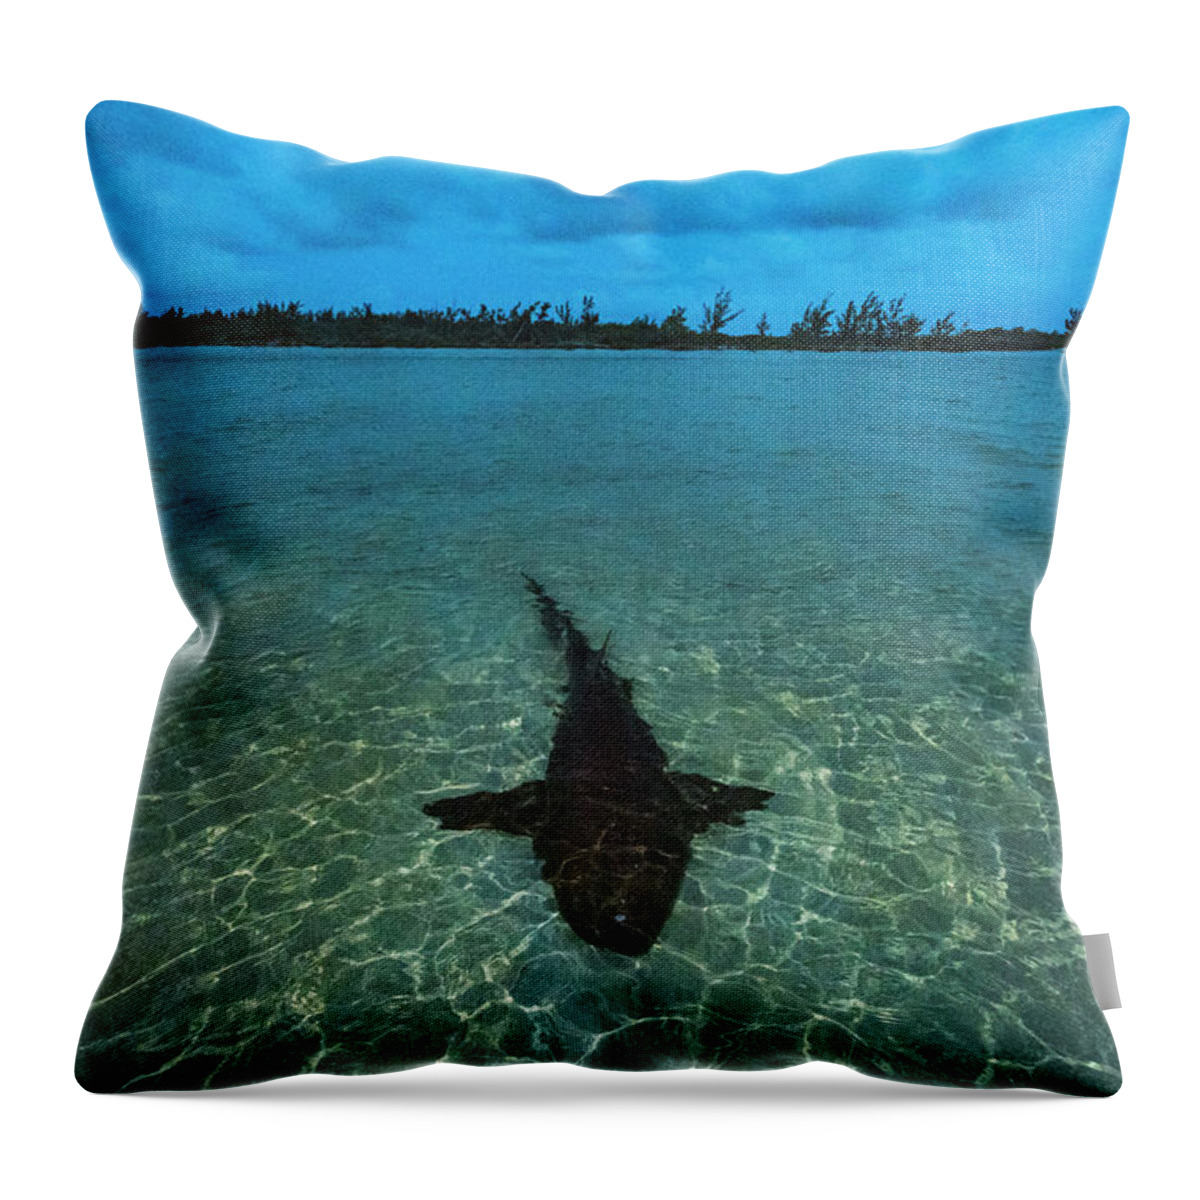 Animal Throw Pillow featuring the photograph Nurse Shark Resting In Shallow Water At Sunset To Save by Shane Gross / Naturepl.com